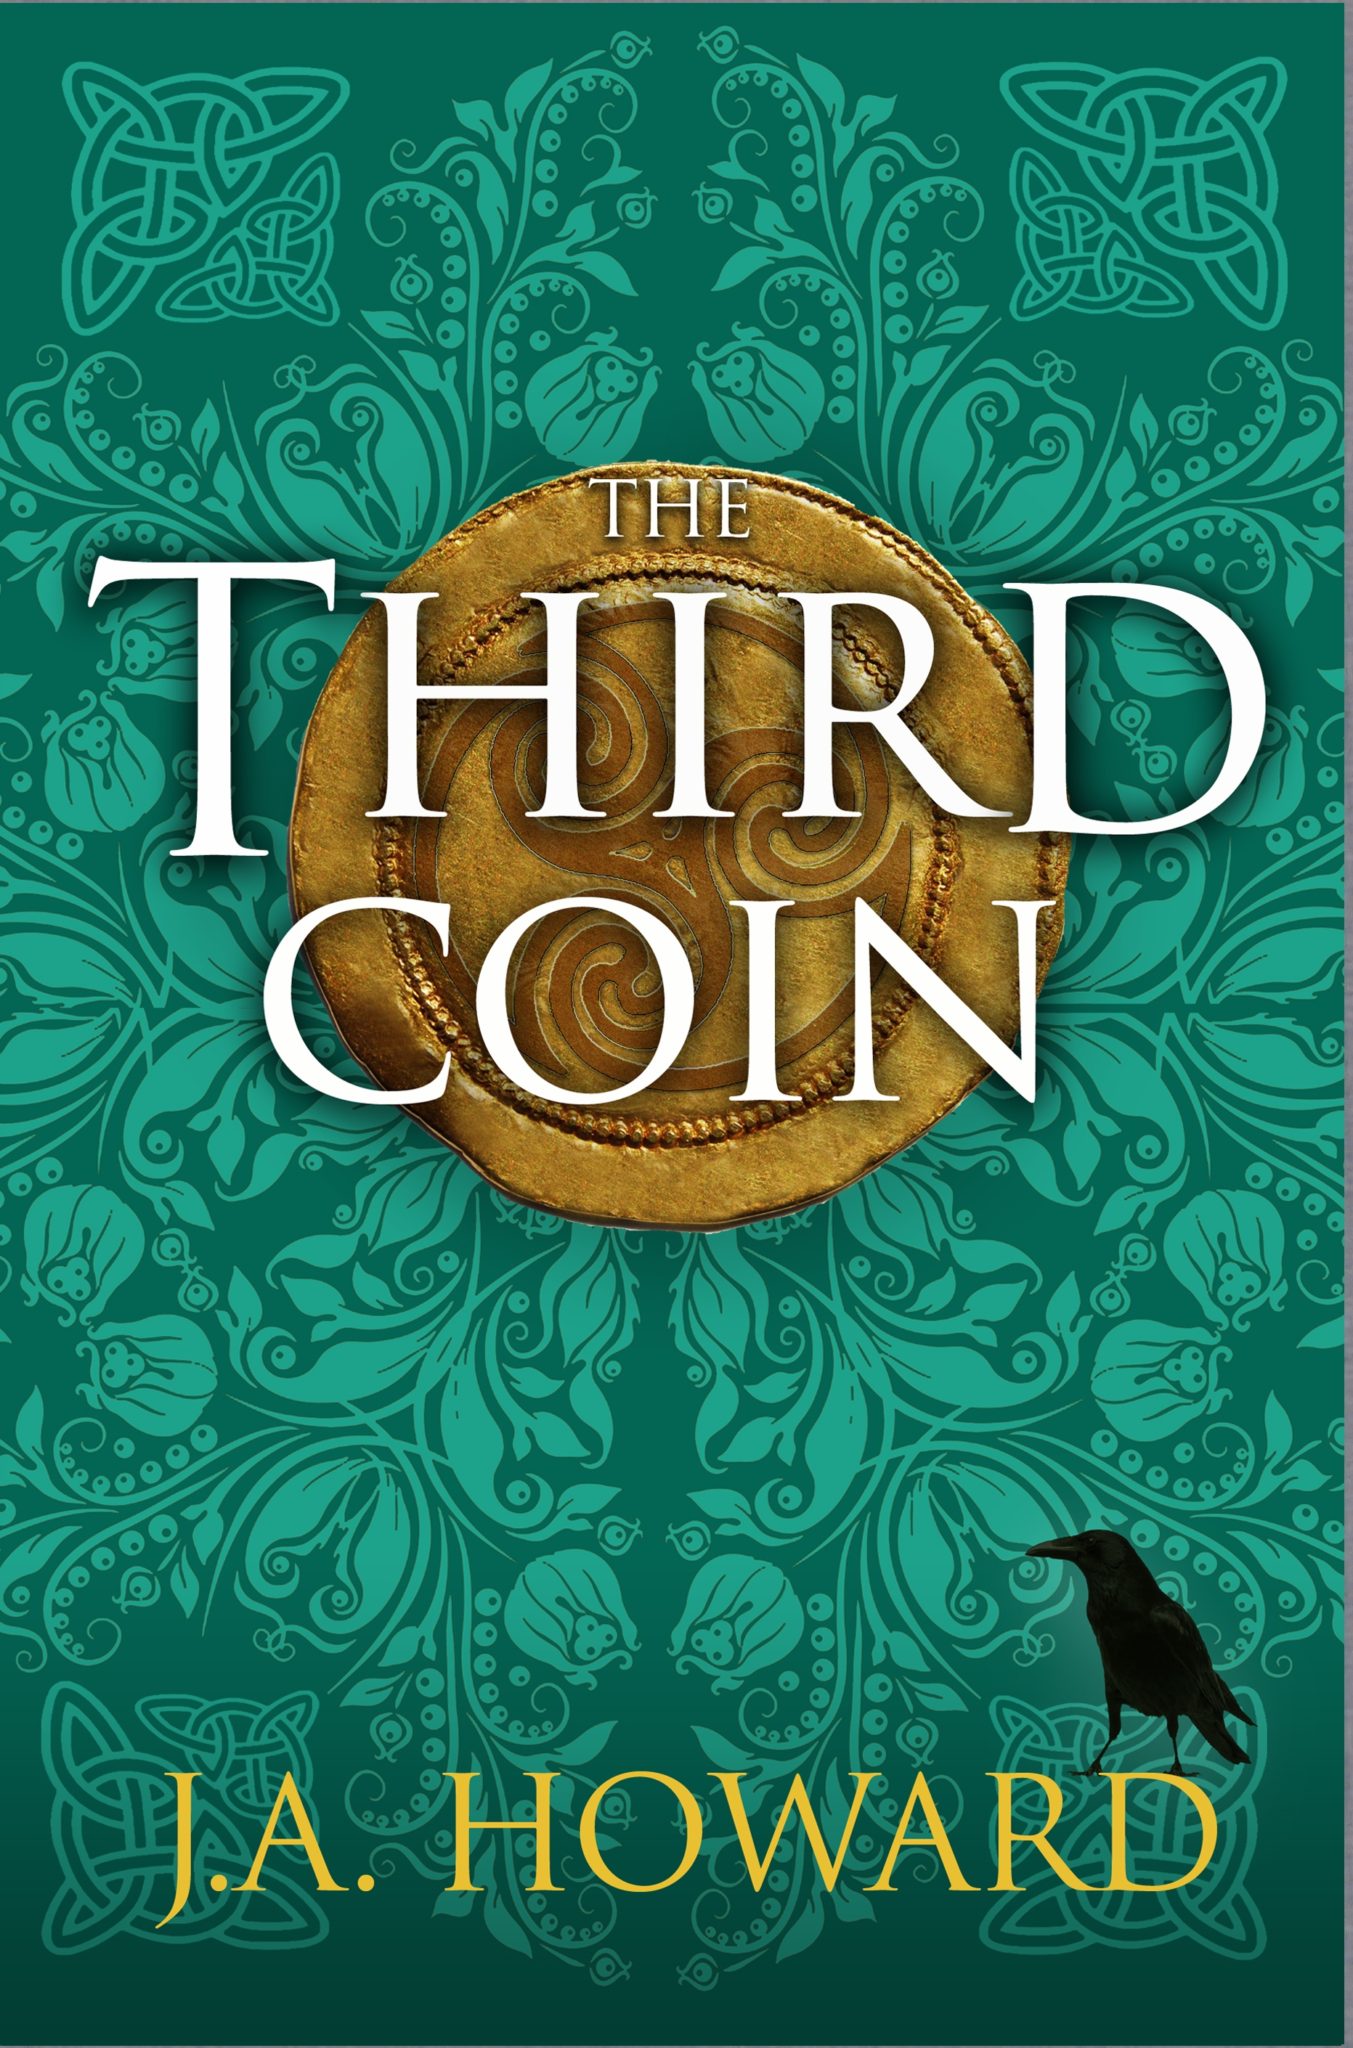 FREE: The Third Coin by J. A. Howard